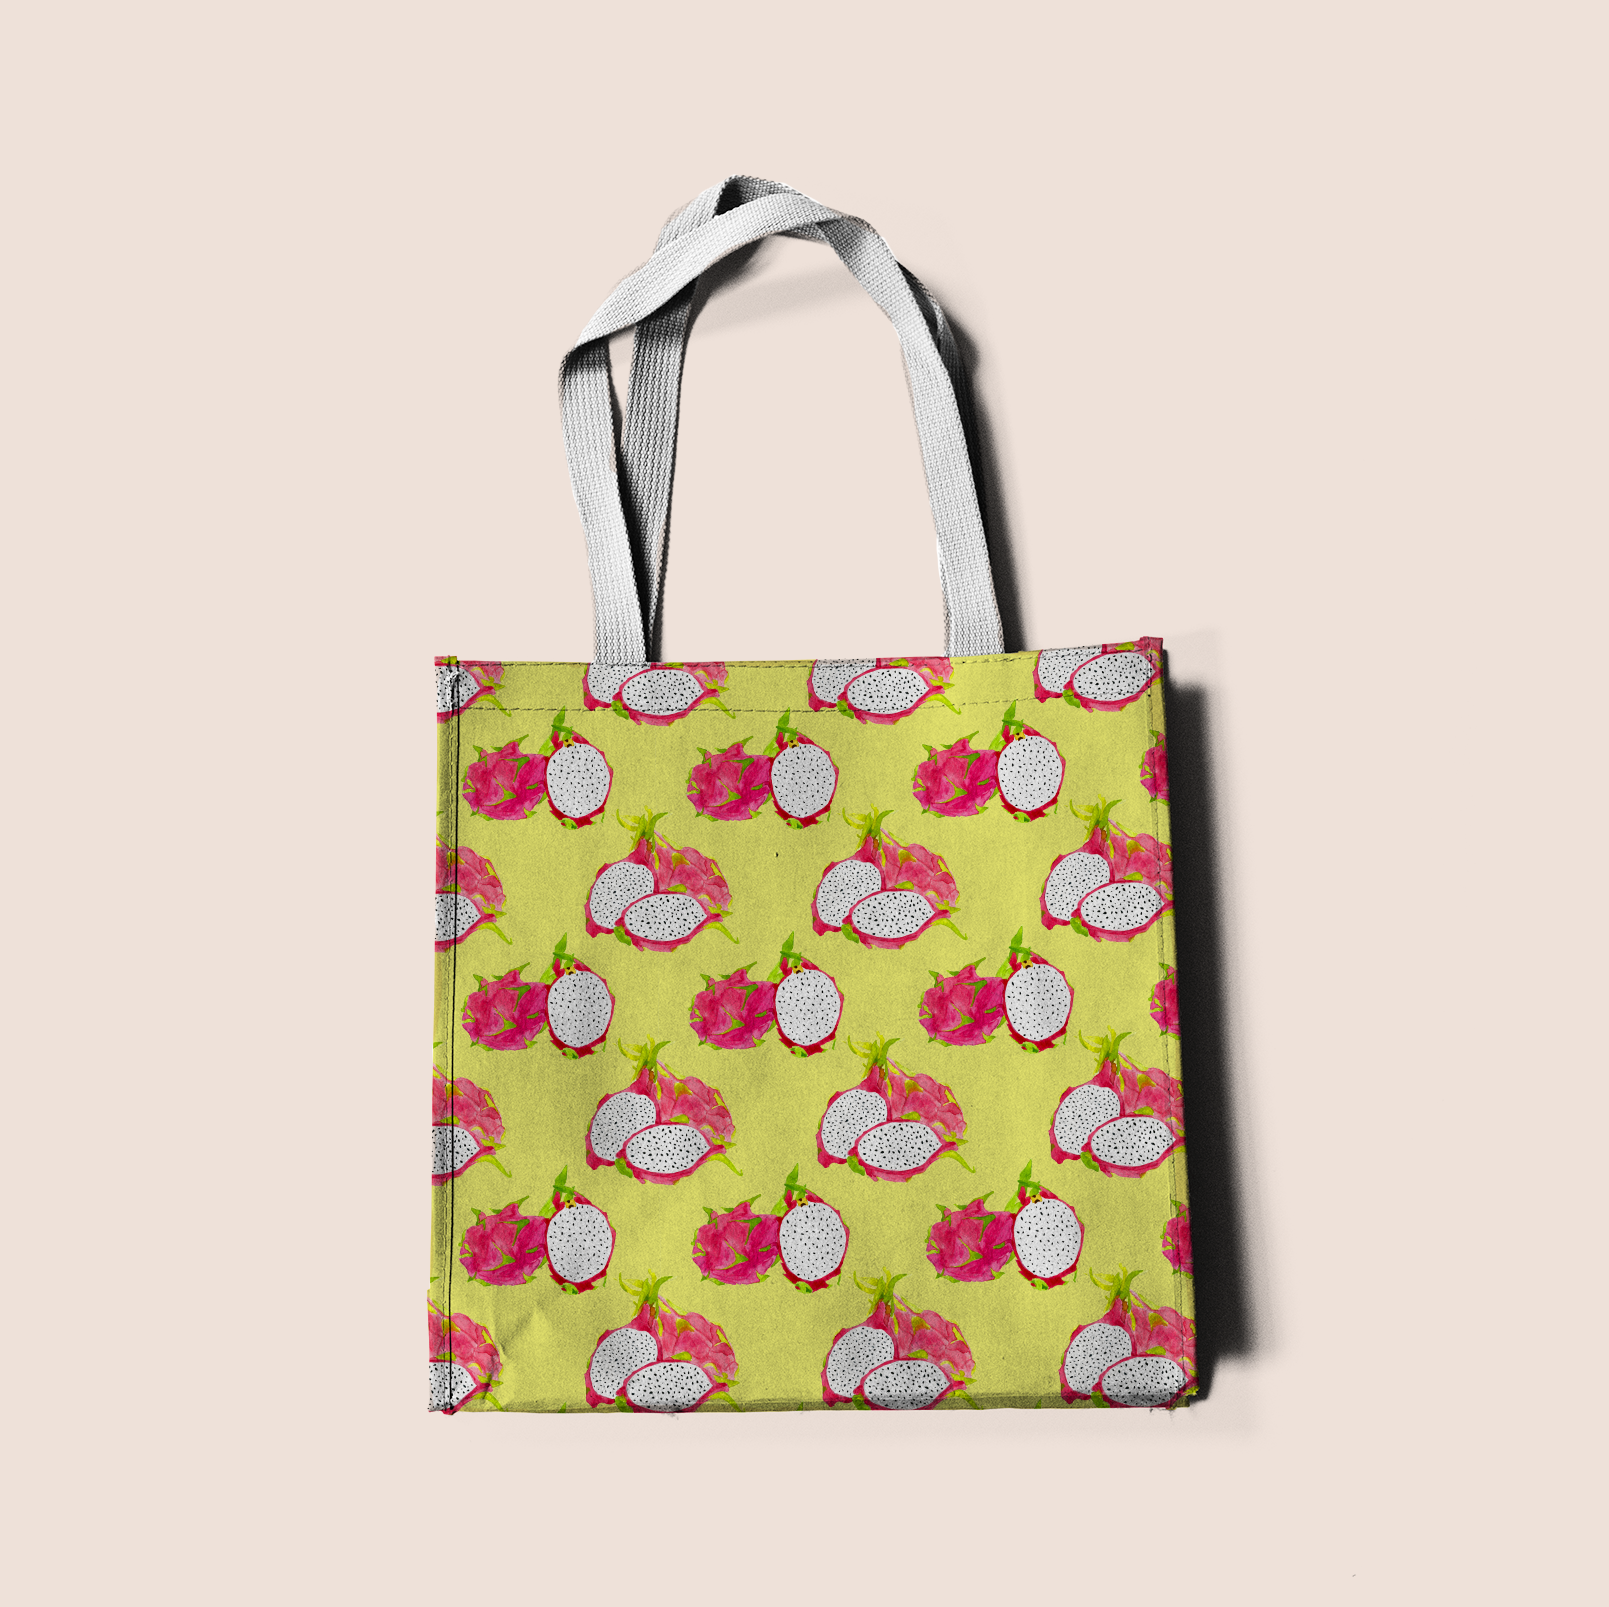 Dragon fruit big in yellow pattern design printed on recycled fabric canvas mockup